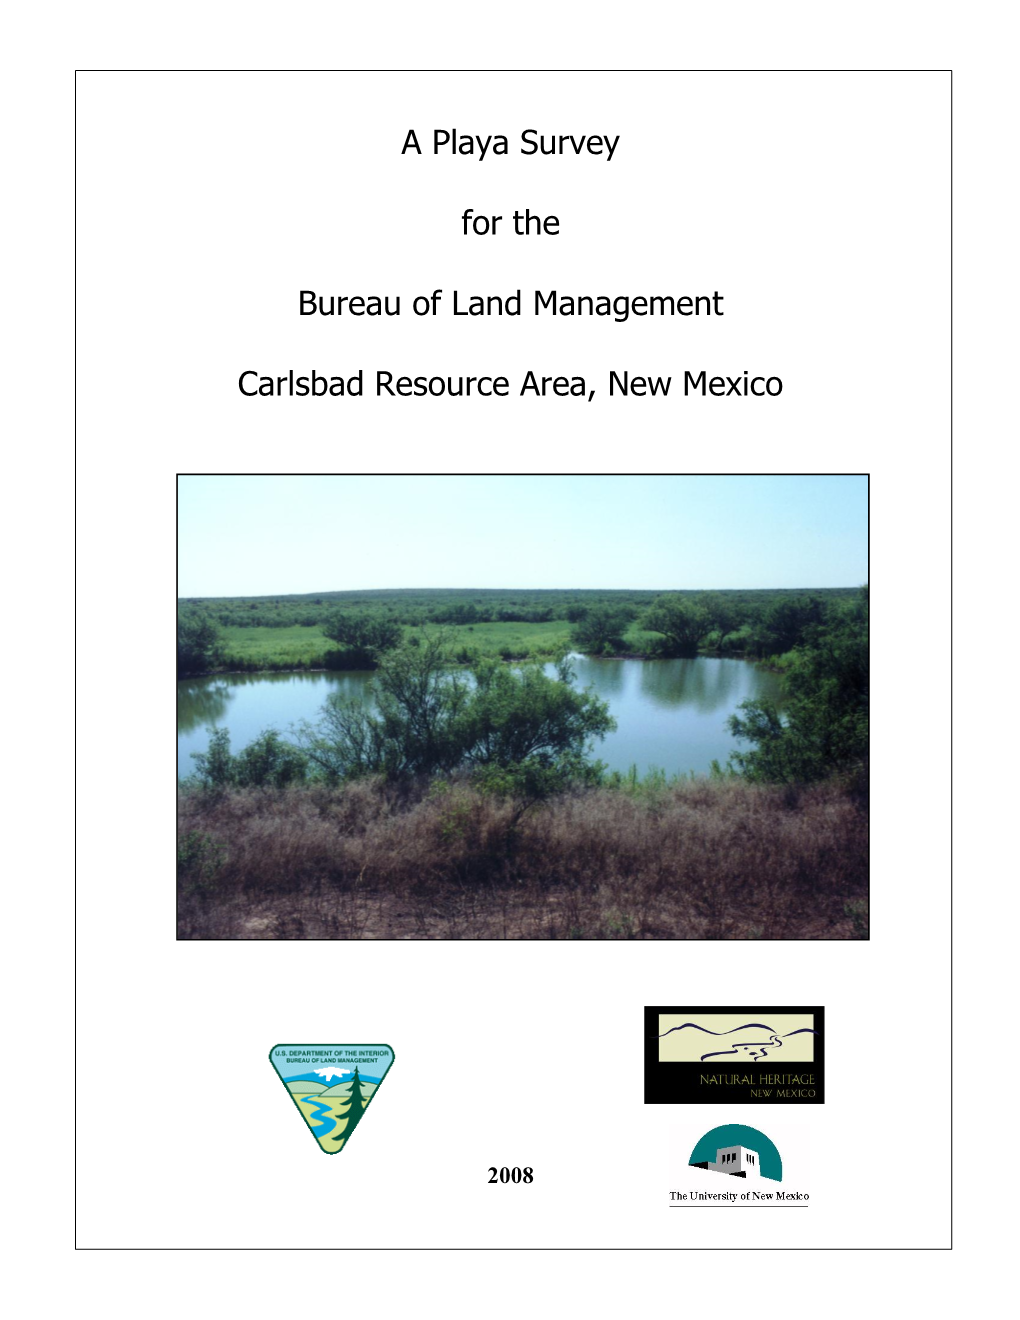 A Playa Survey for the Bureau of Land Management Carlsbad Resource Area, New Mexico